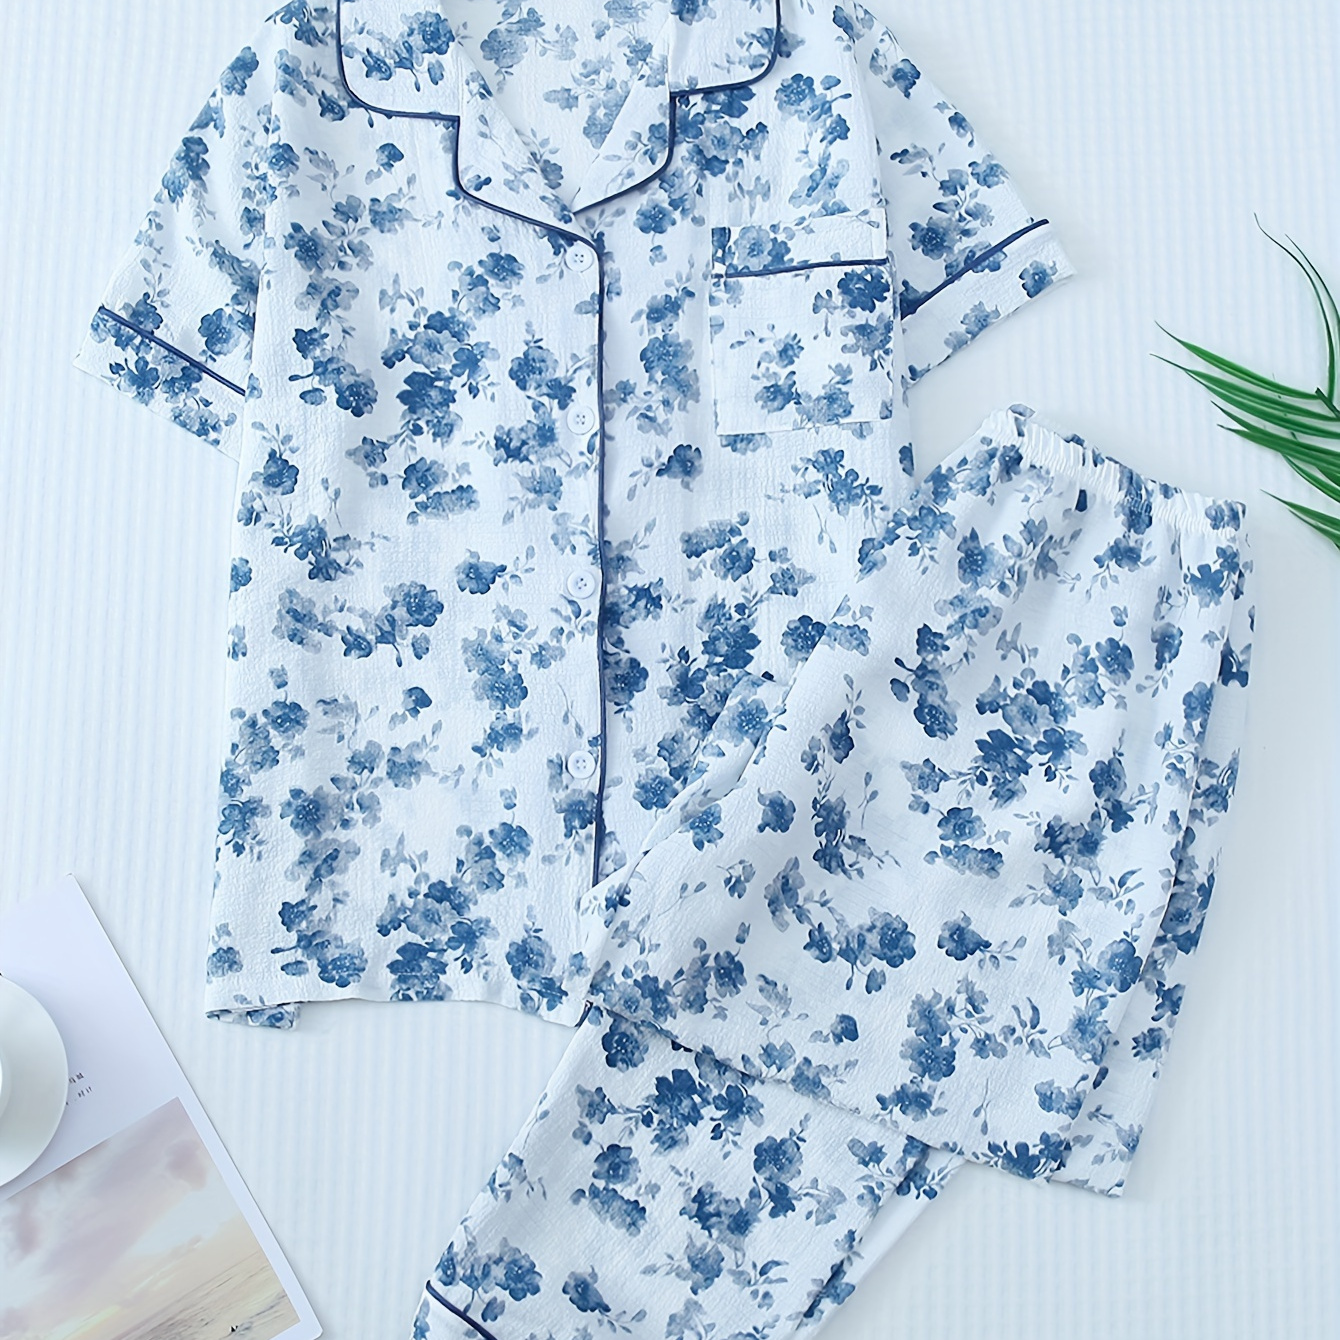 

Women's Ink Floral Print Casual Pajama Set, Short Sleeve Buttons Lapel Top & Pants, Comfortable Relaxed Fit, Summer Nightwear